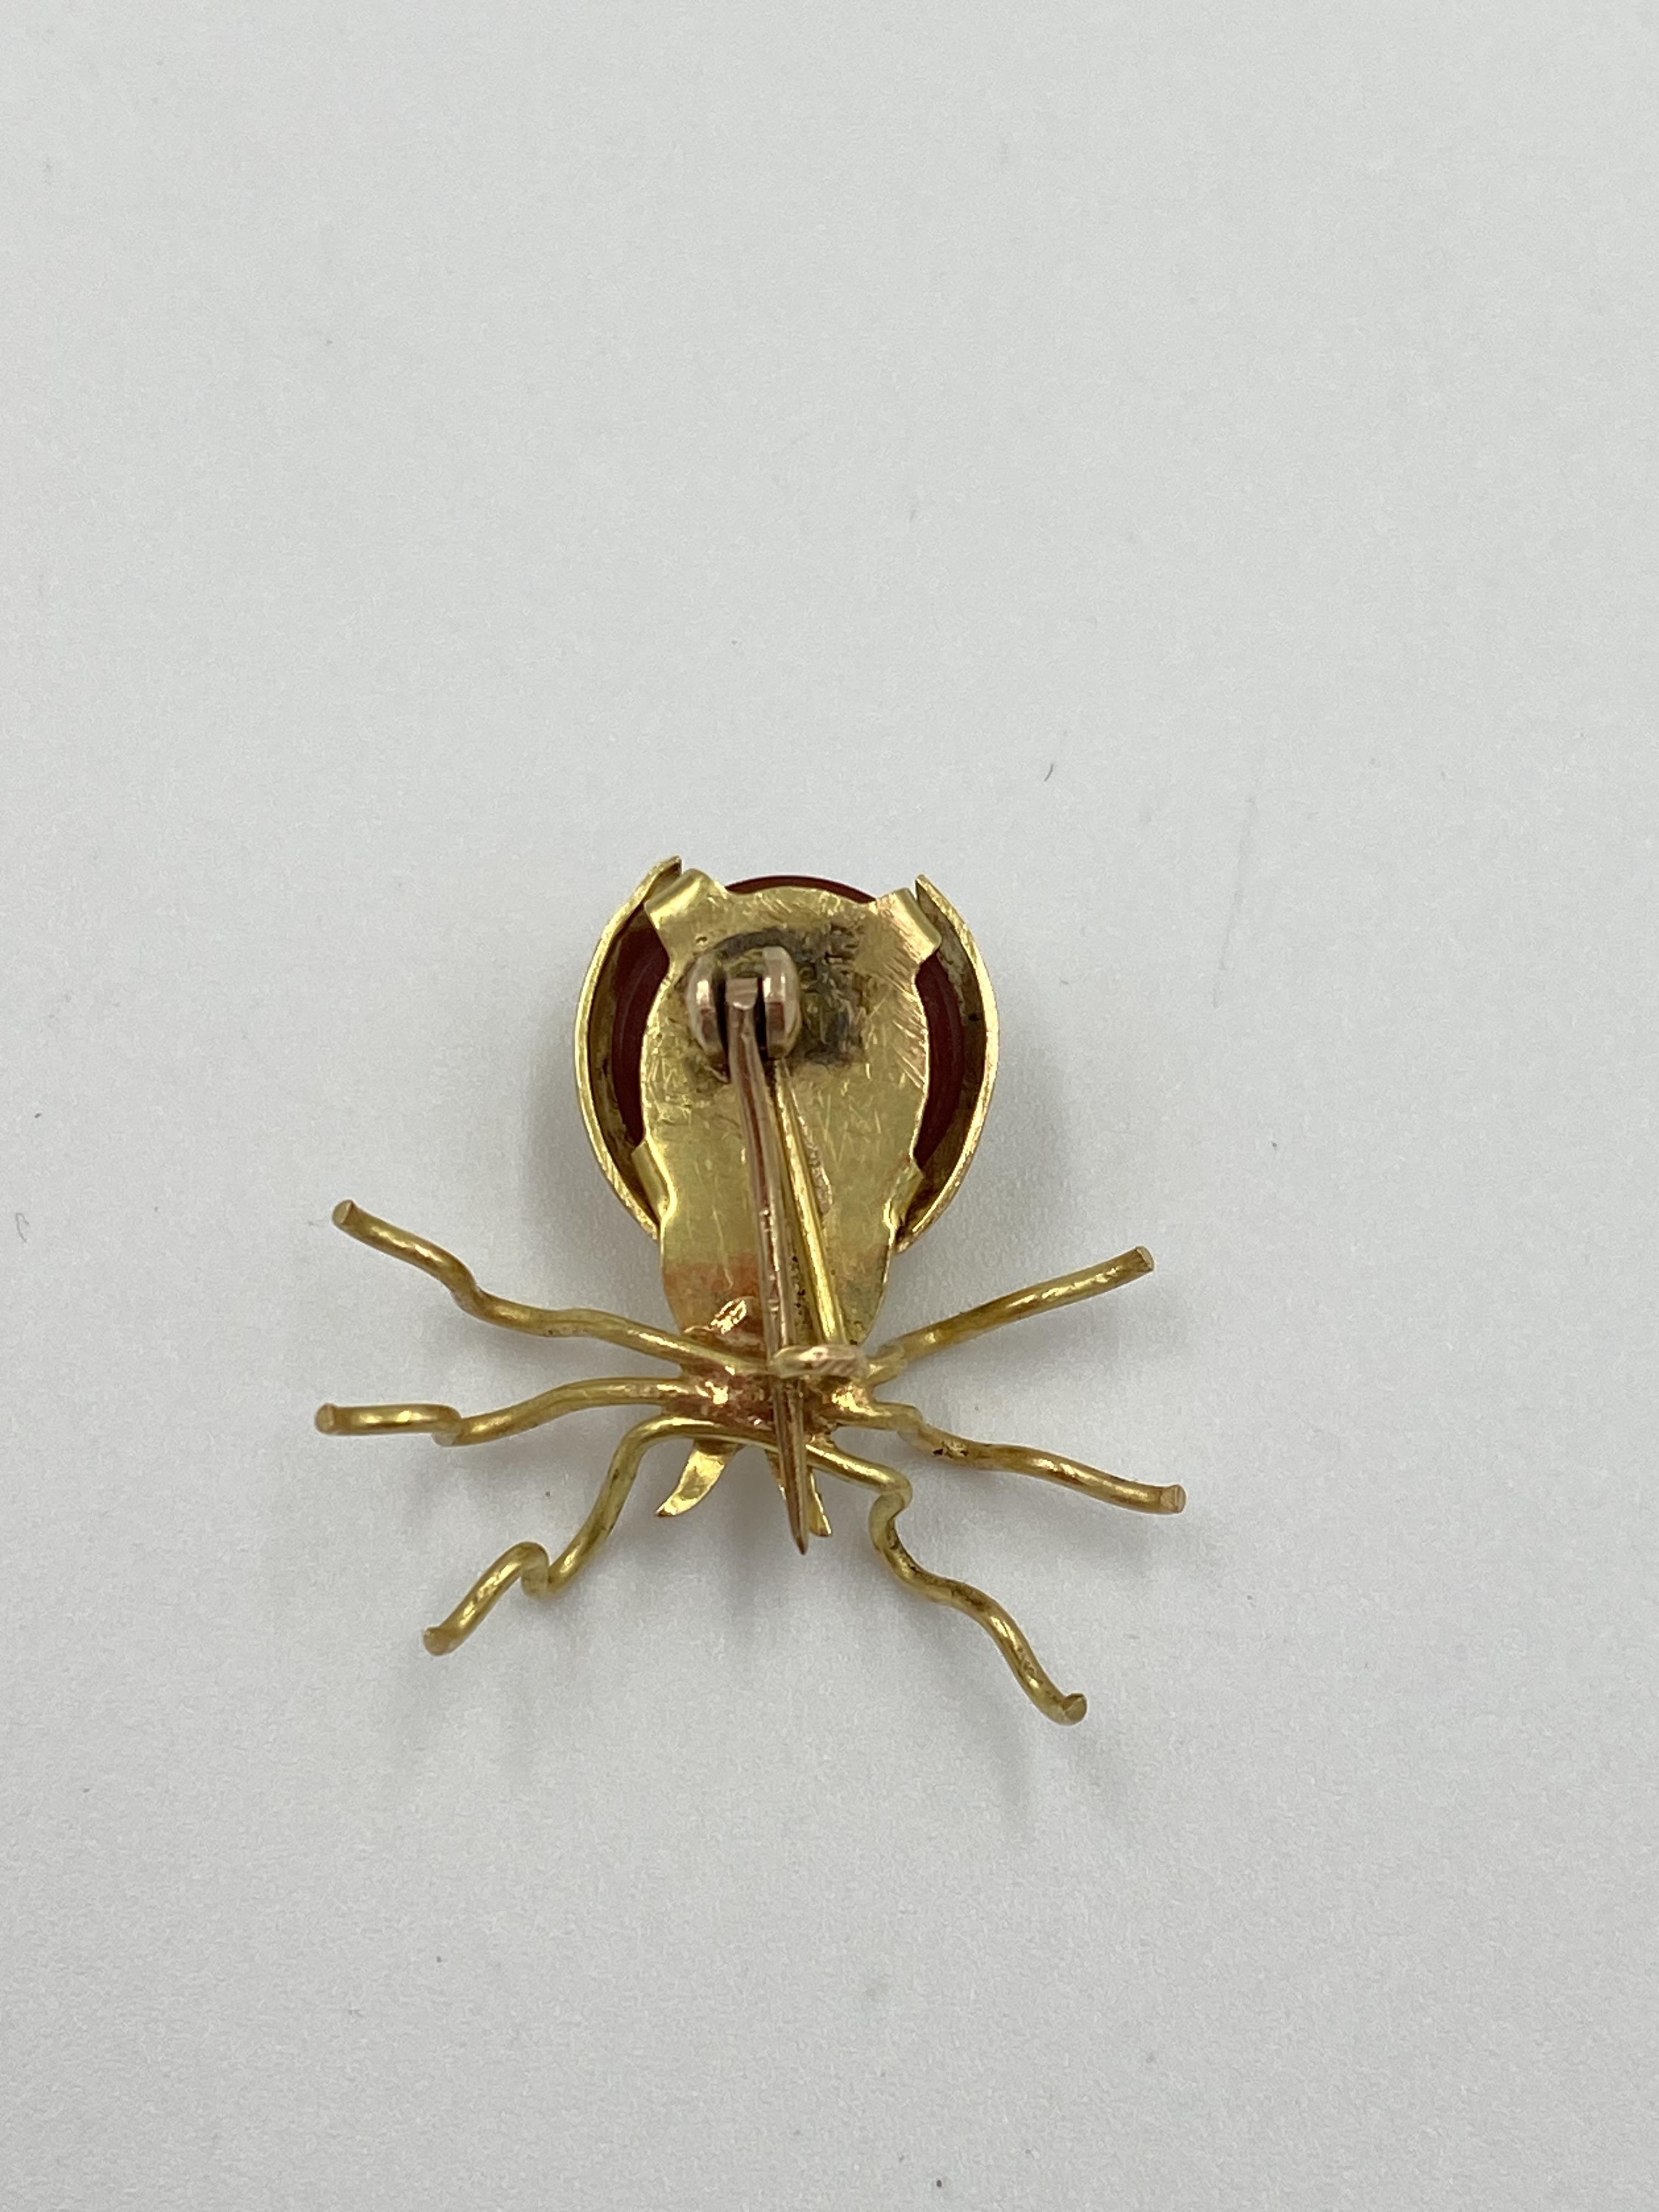 18ct gold spider brooch set with a carnelian cabochon - Image 4 of 4